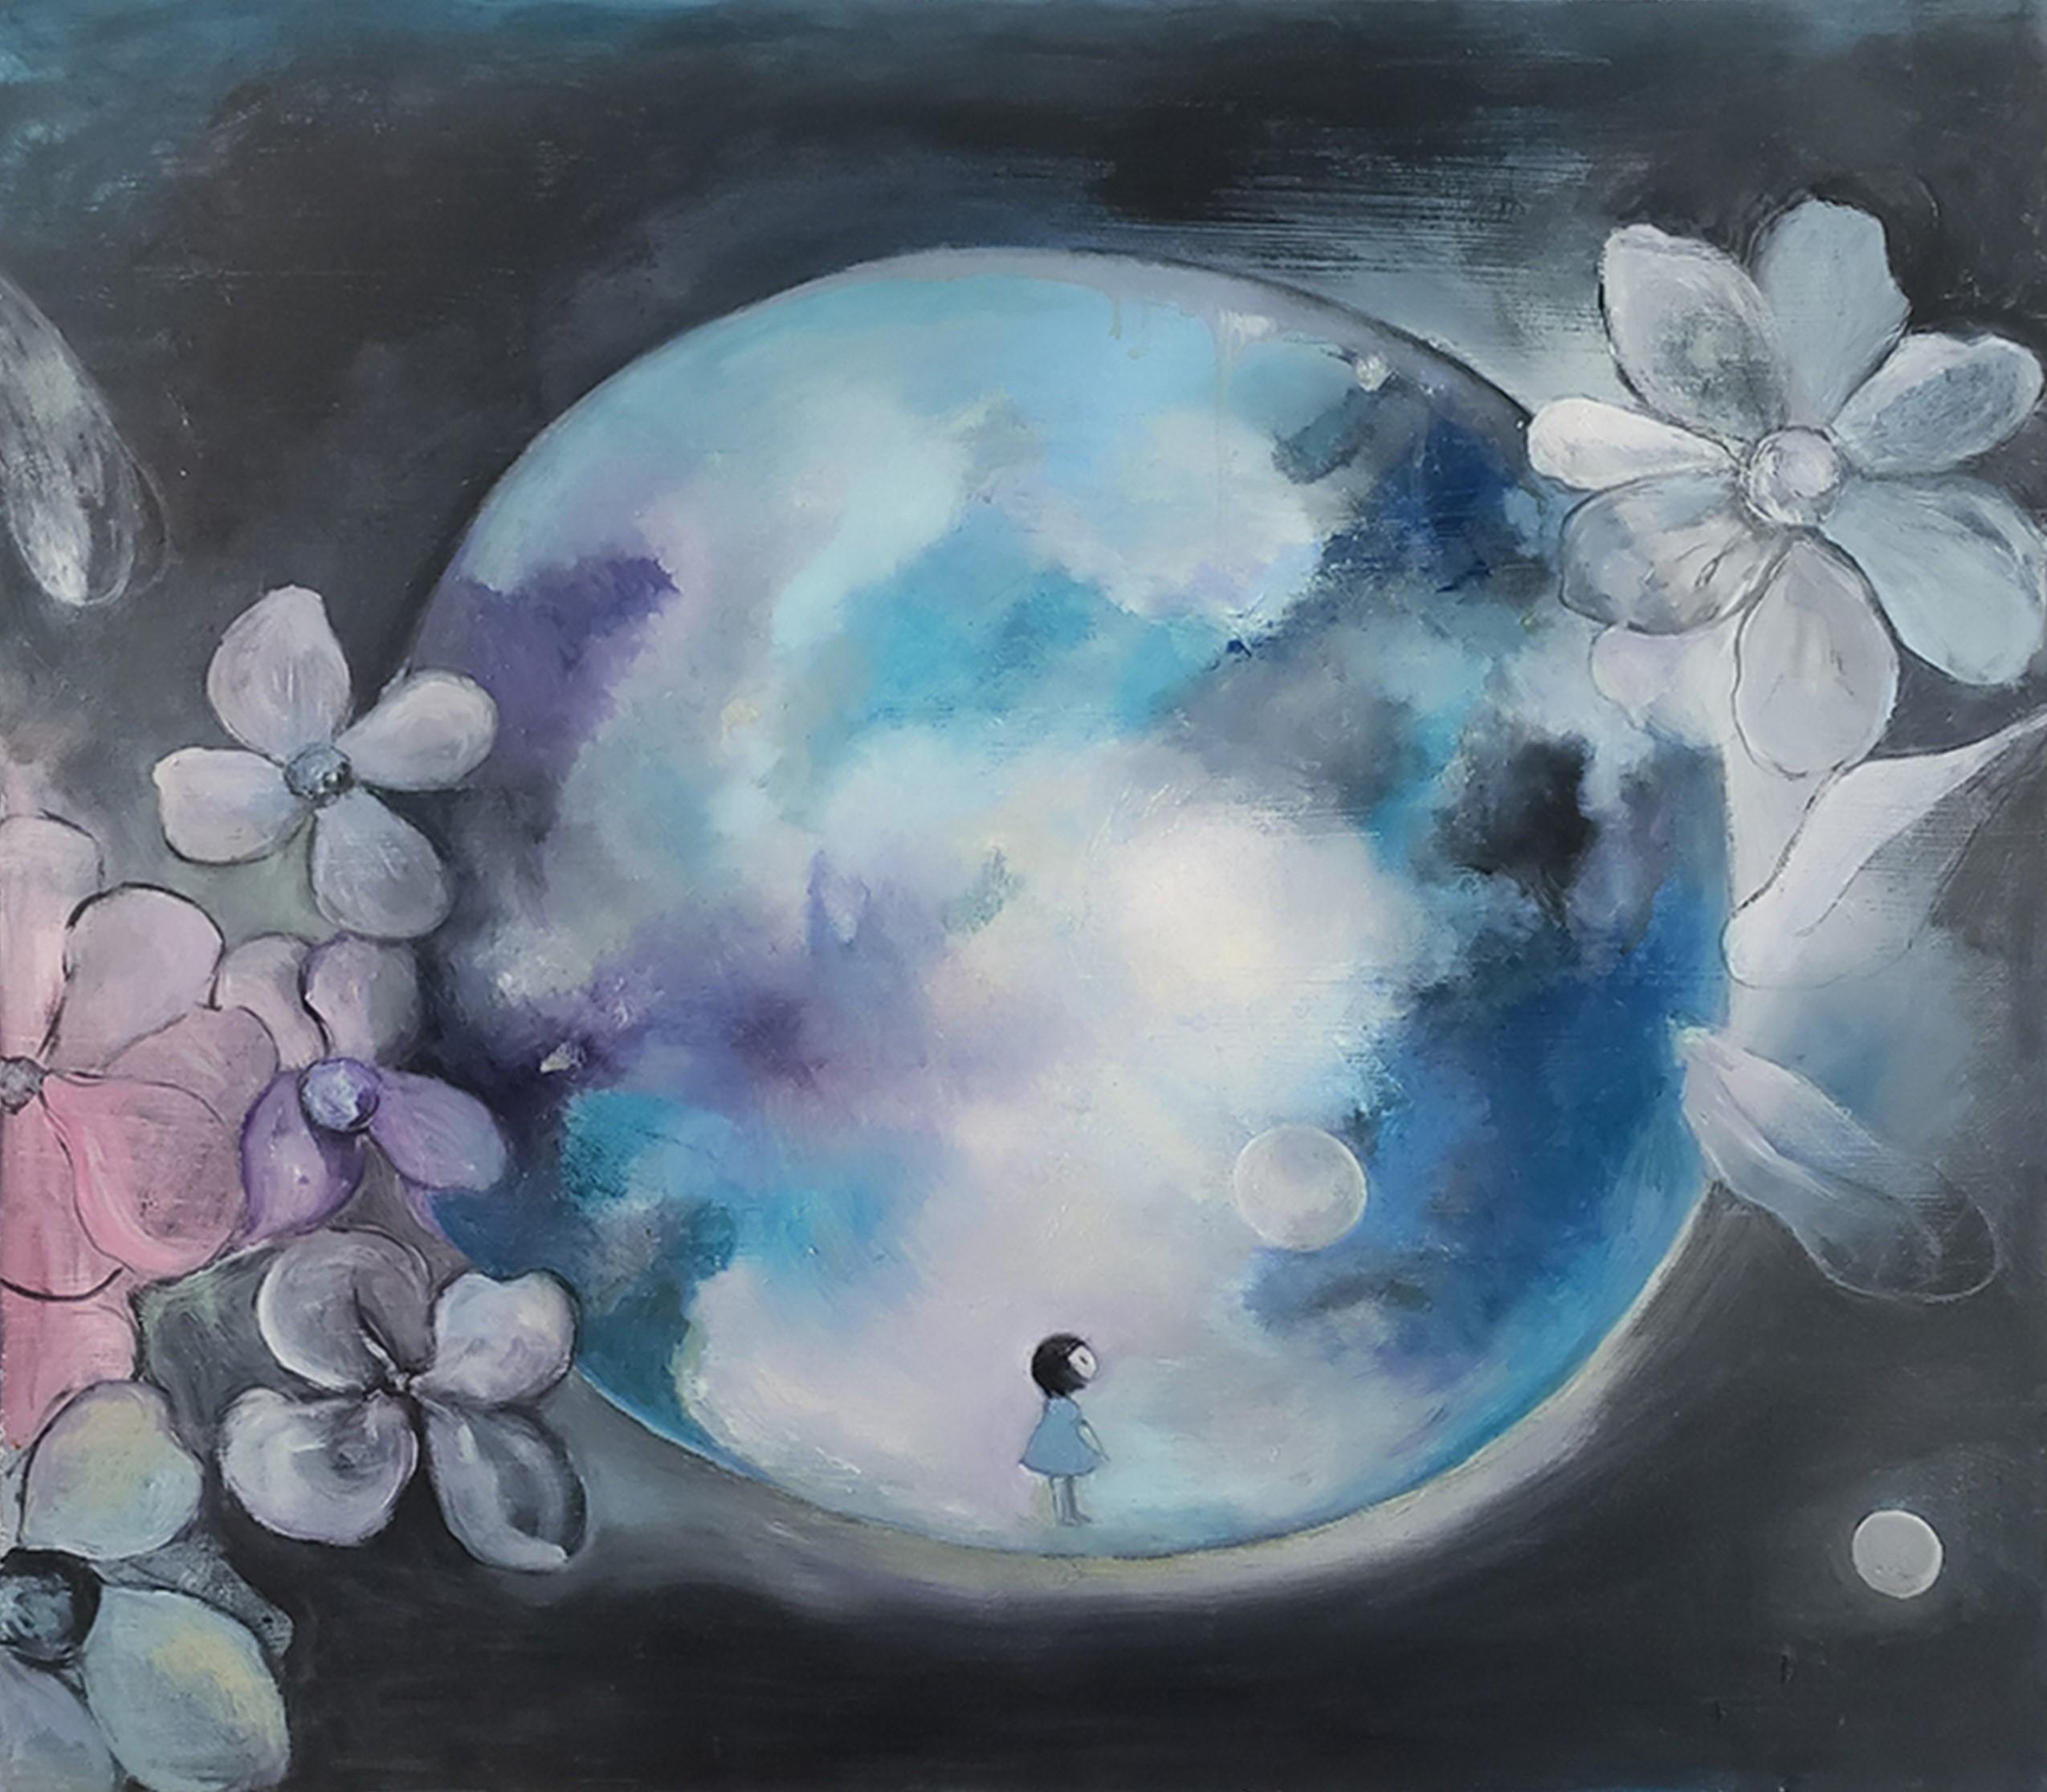 Clementine Chan Figurative Painting - "Blue Moon" figurative oil painting girl nature moon flower dreamy meditation